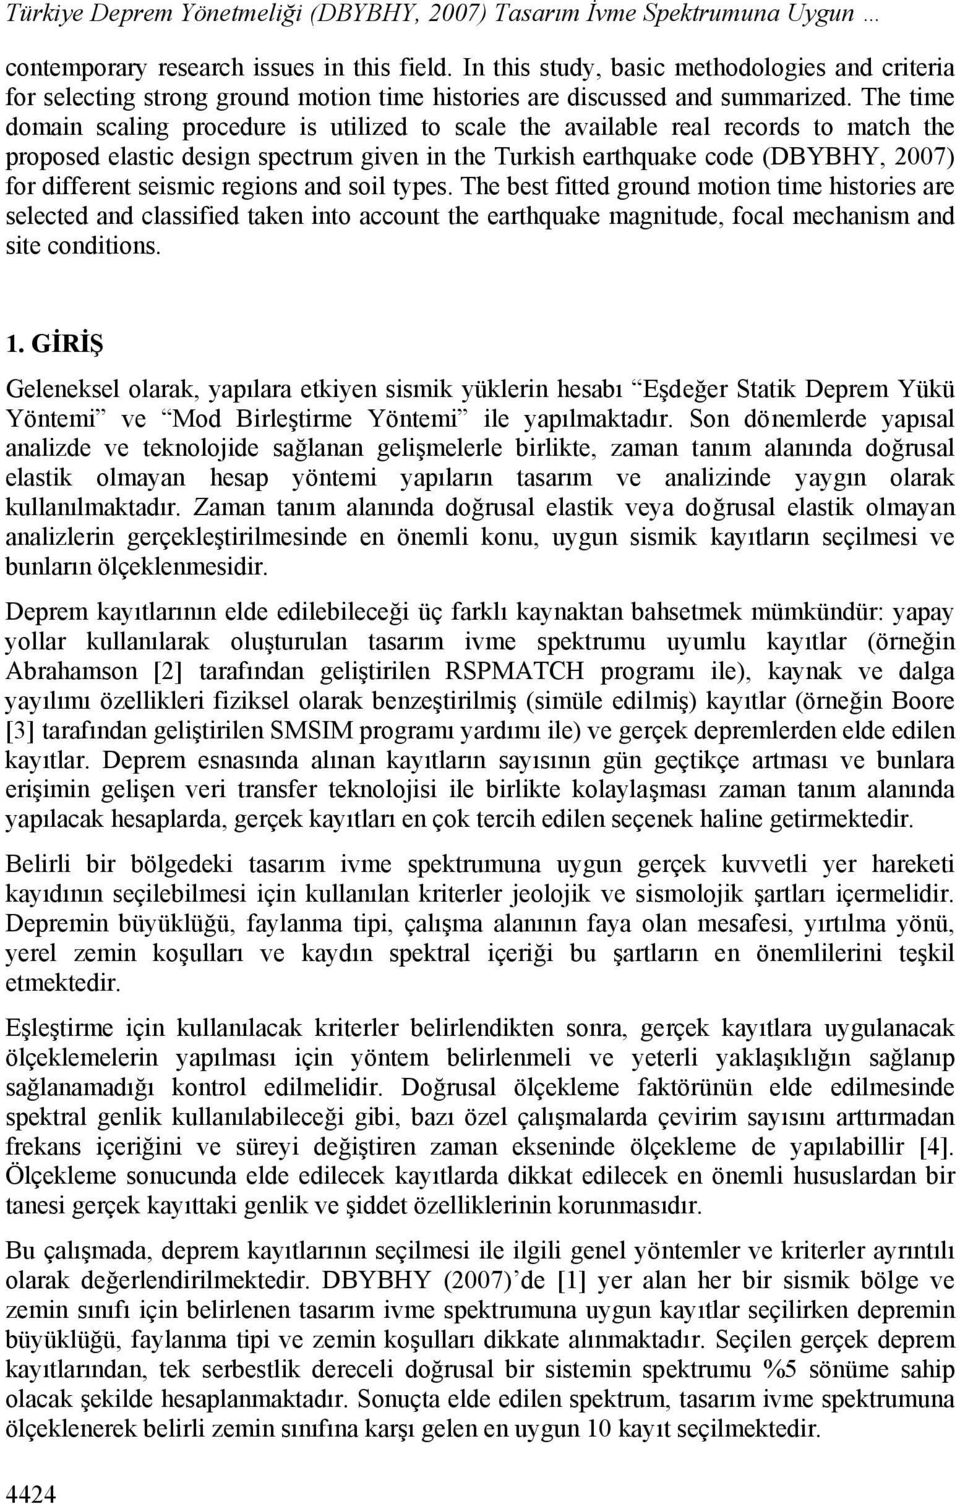 The time domain scaling procedure is utilized to scale the available real records to match the proposed elastic design spectrum given in the Turkish earthquake code (DBYBHY, 2007) for different